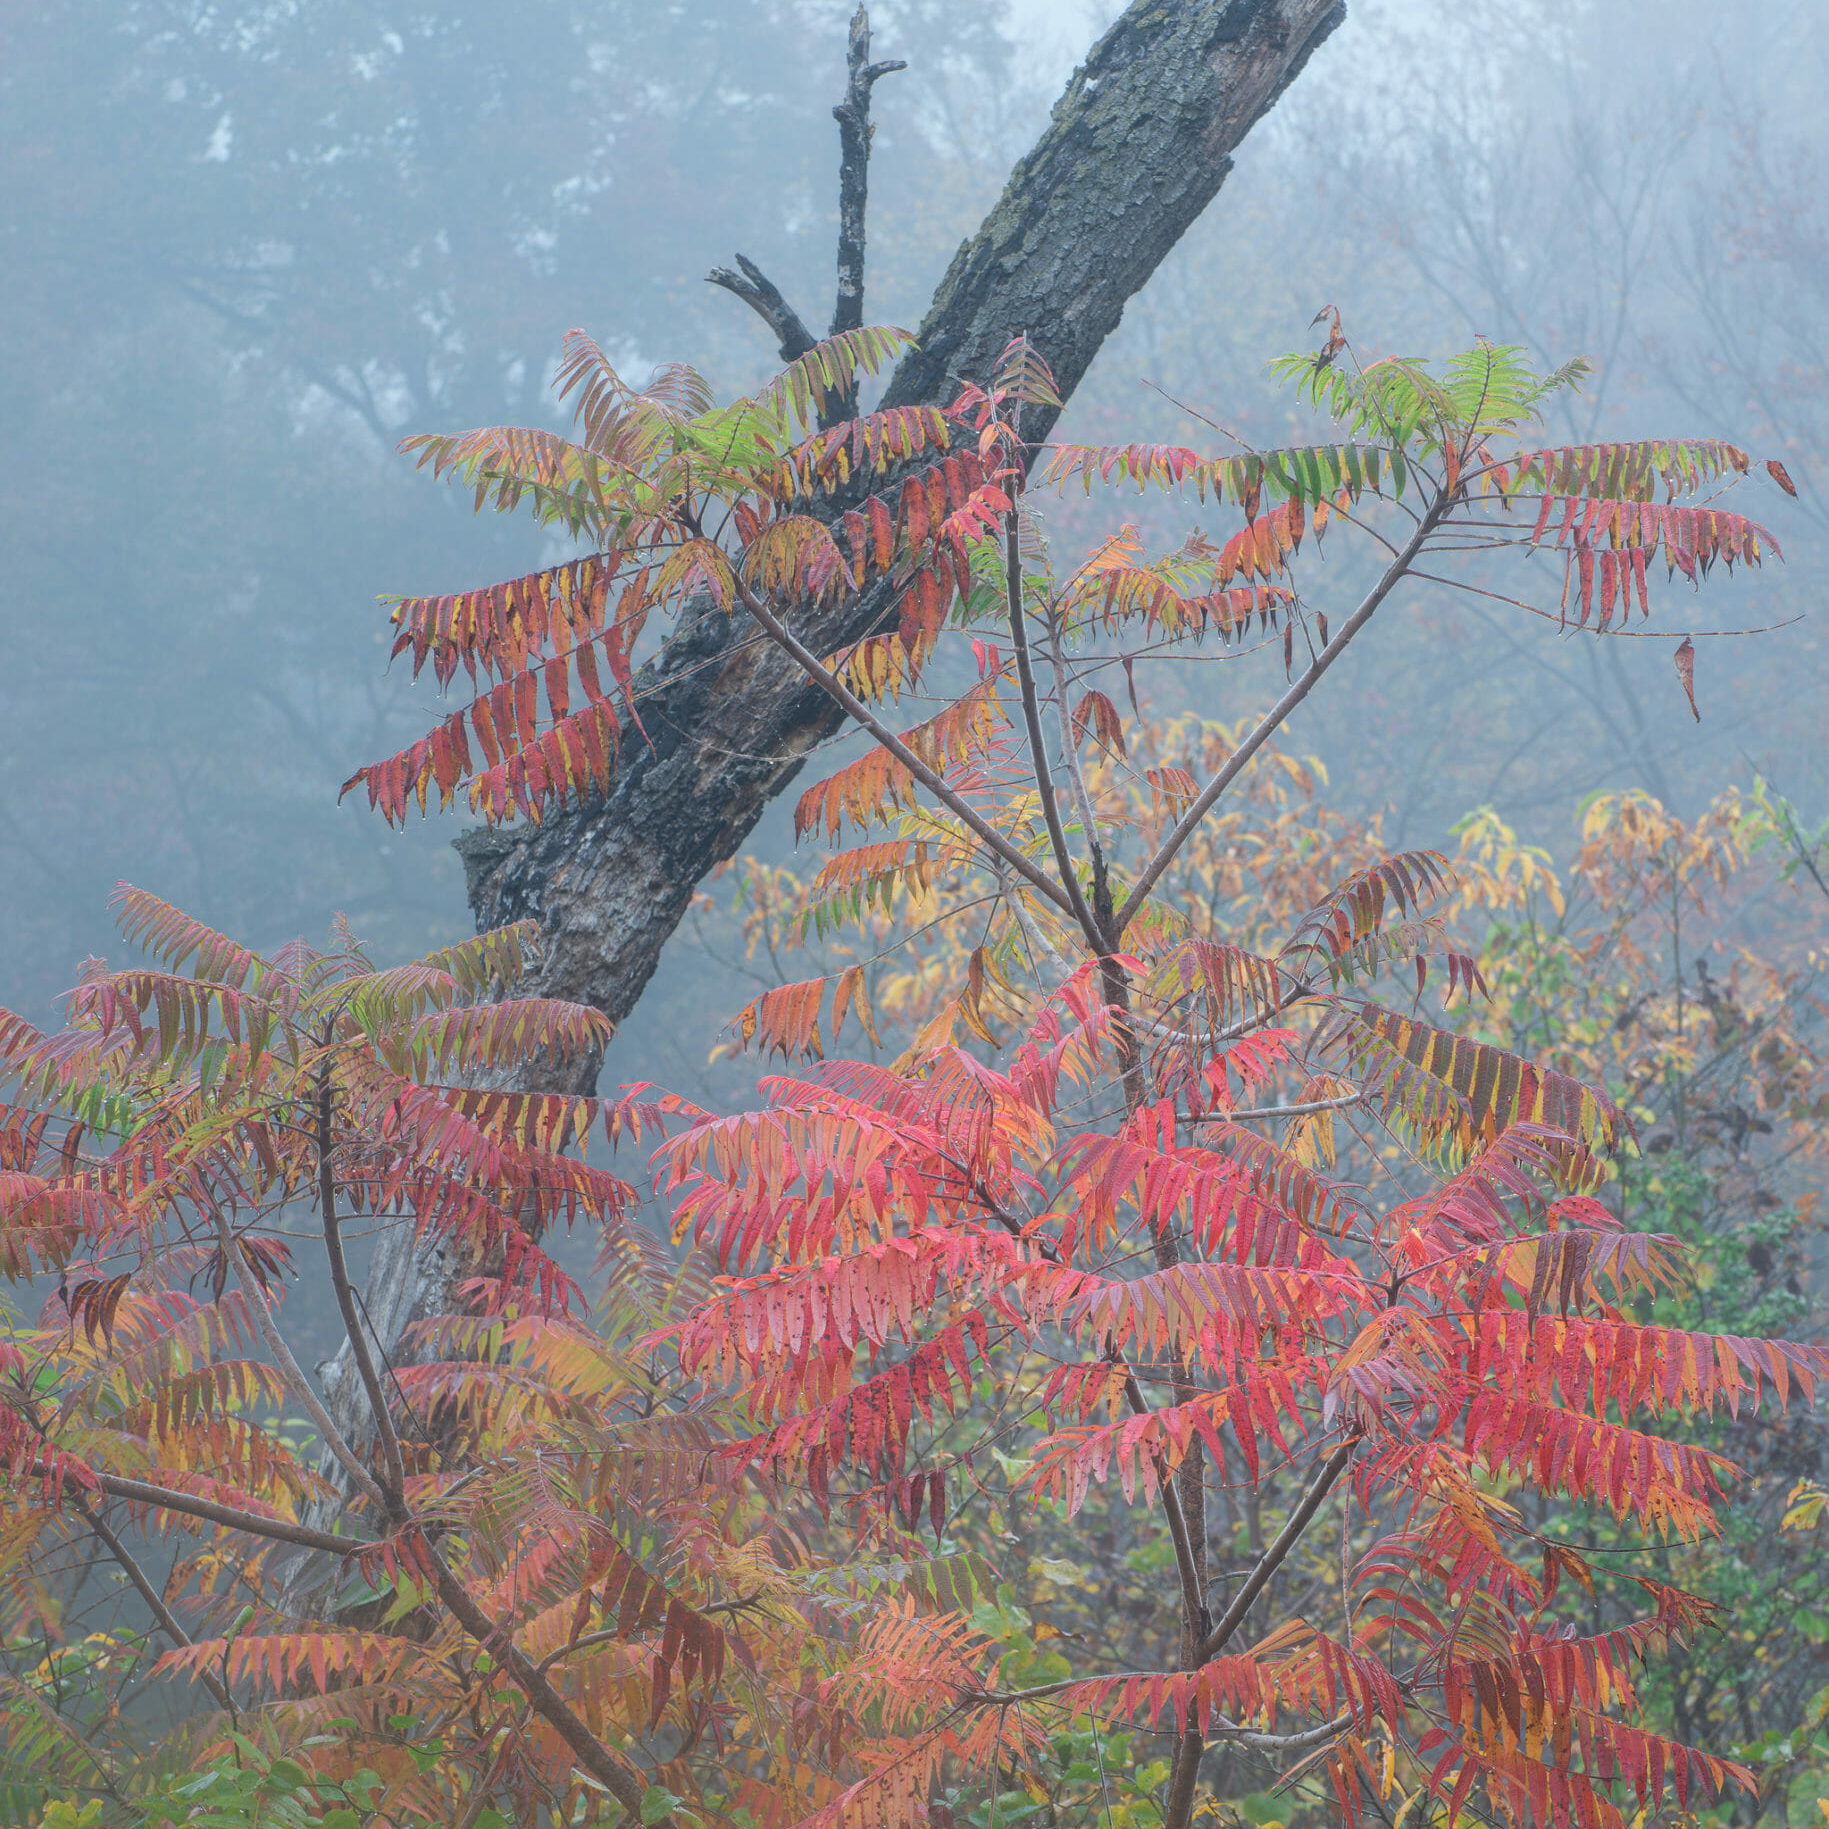 The vegetation in a Pennsylvania forest burns red in October while the morning fog envelops the landscape, creating a mysterious mood.